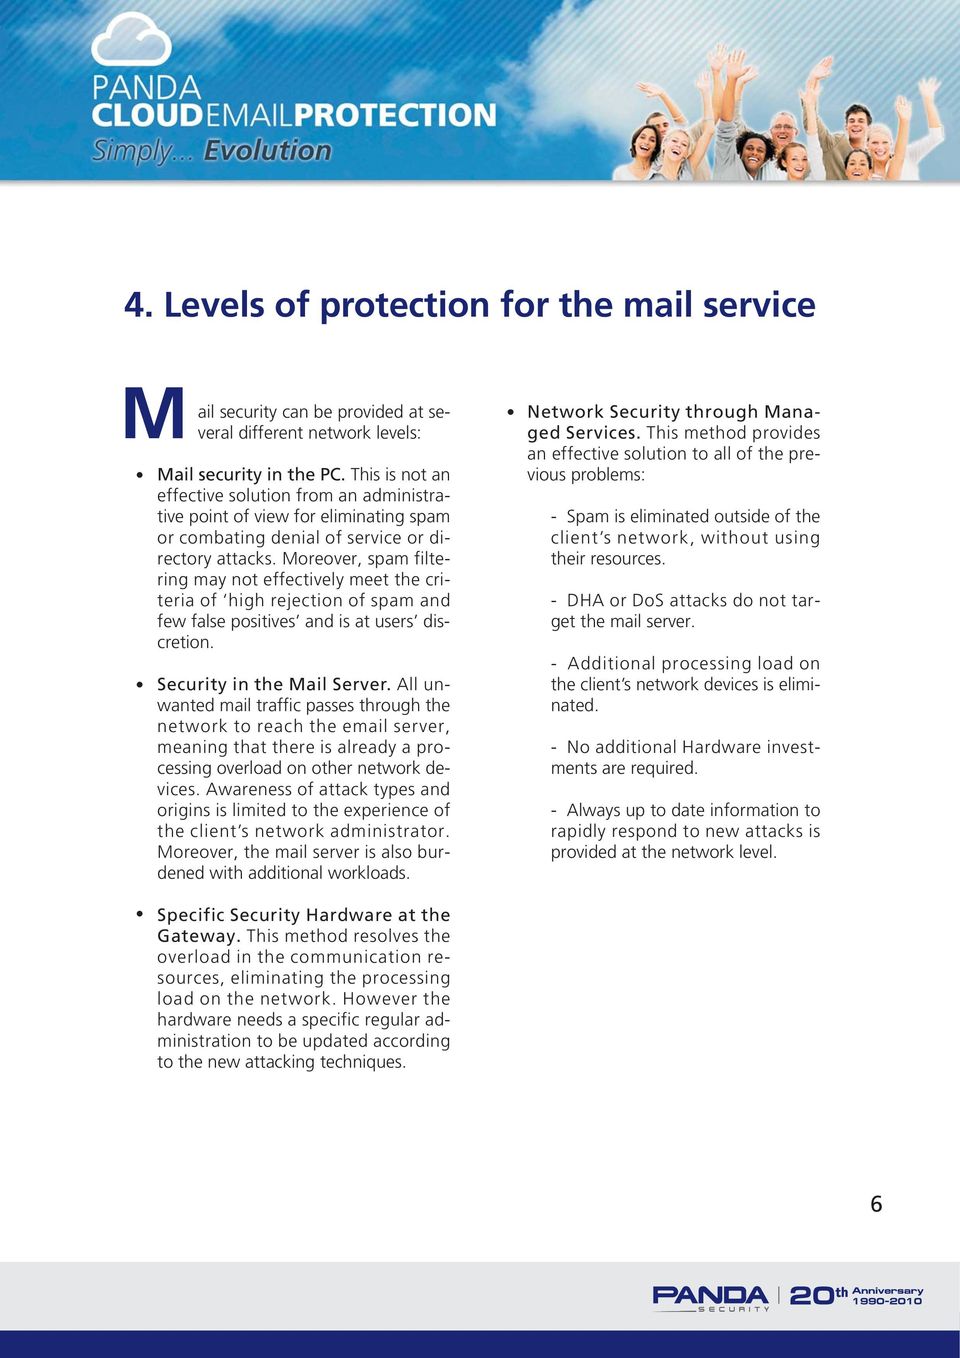 Moreover, spam filtering may not effectively meet the criteria of high rejection of spam and few false positives and is at users discretion. Security in the Mail Server.